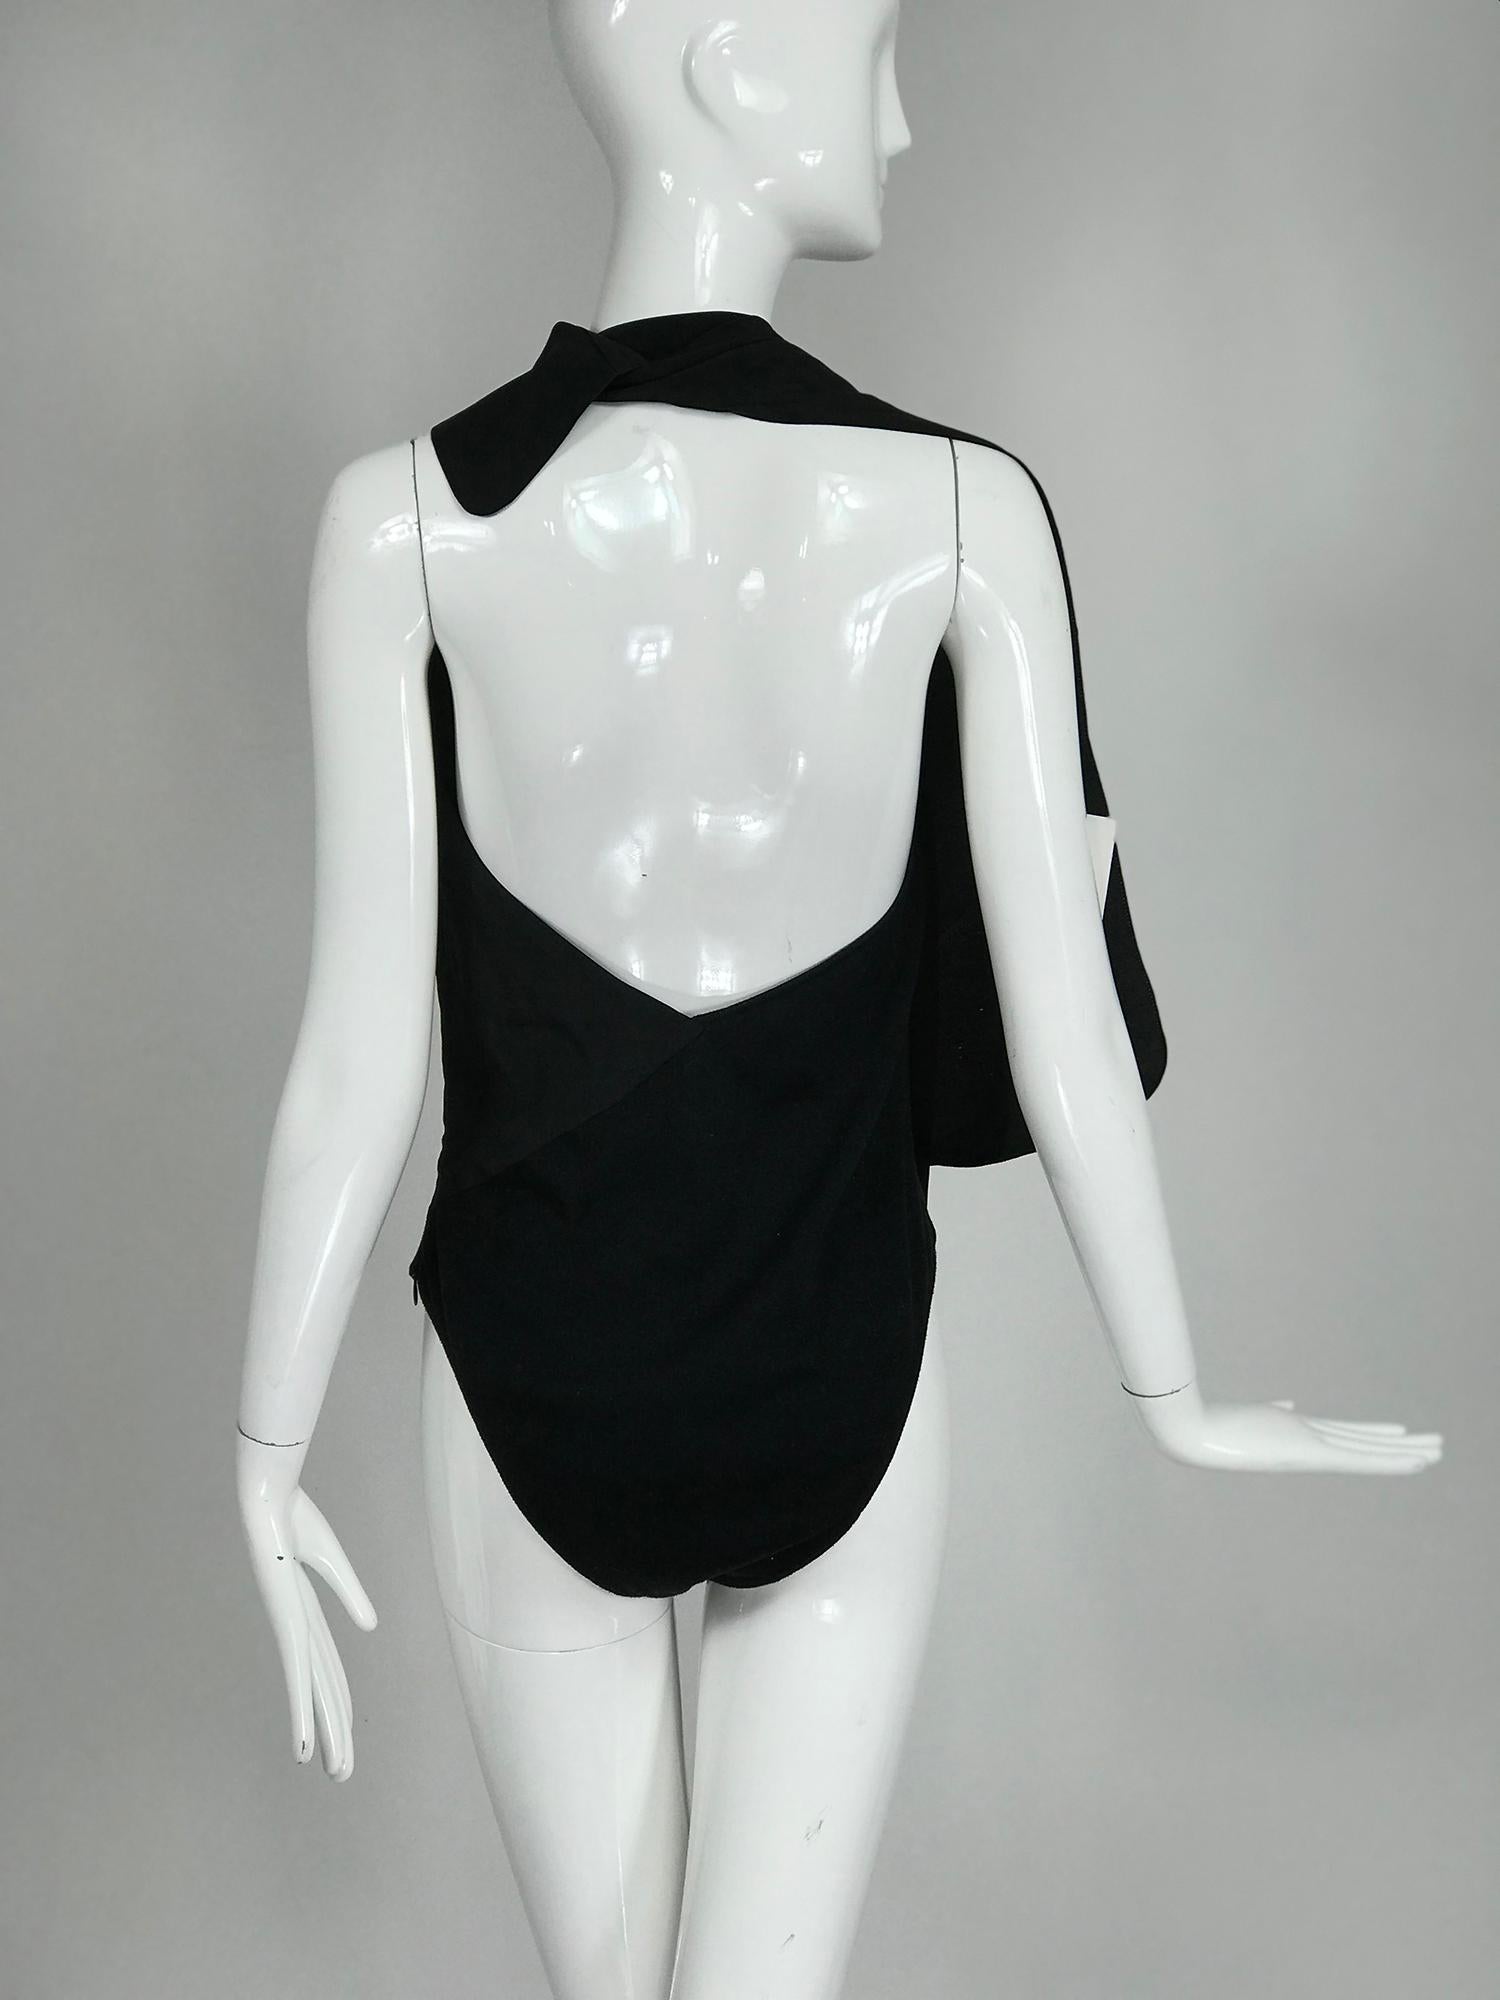 Gianfranco Ferre Black Silk and Sweater Knit Body Suit and Wrap or Drape 1980s For Sale 7